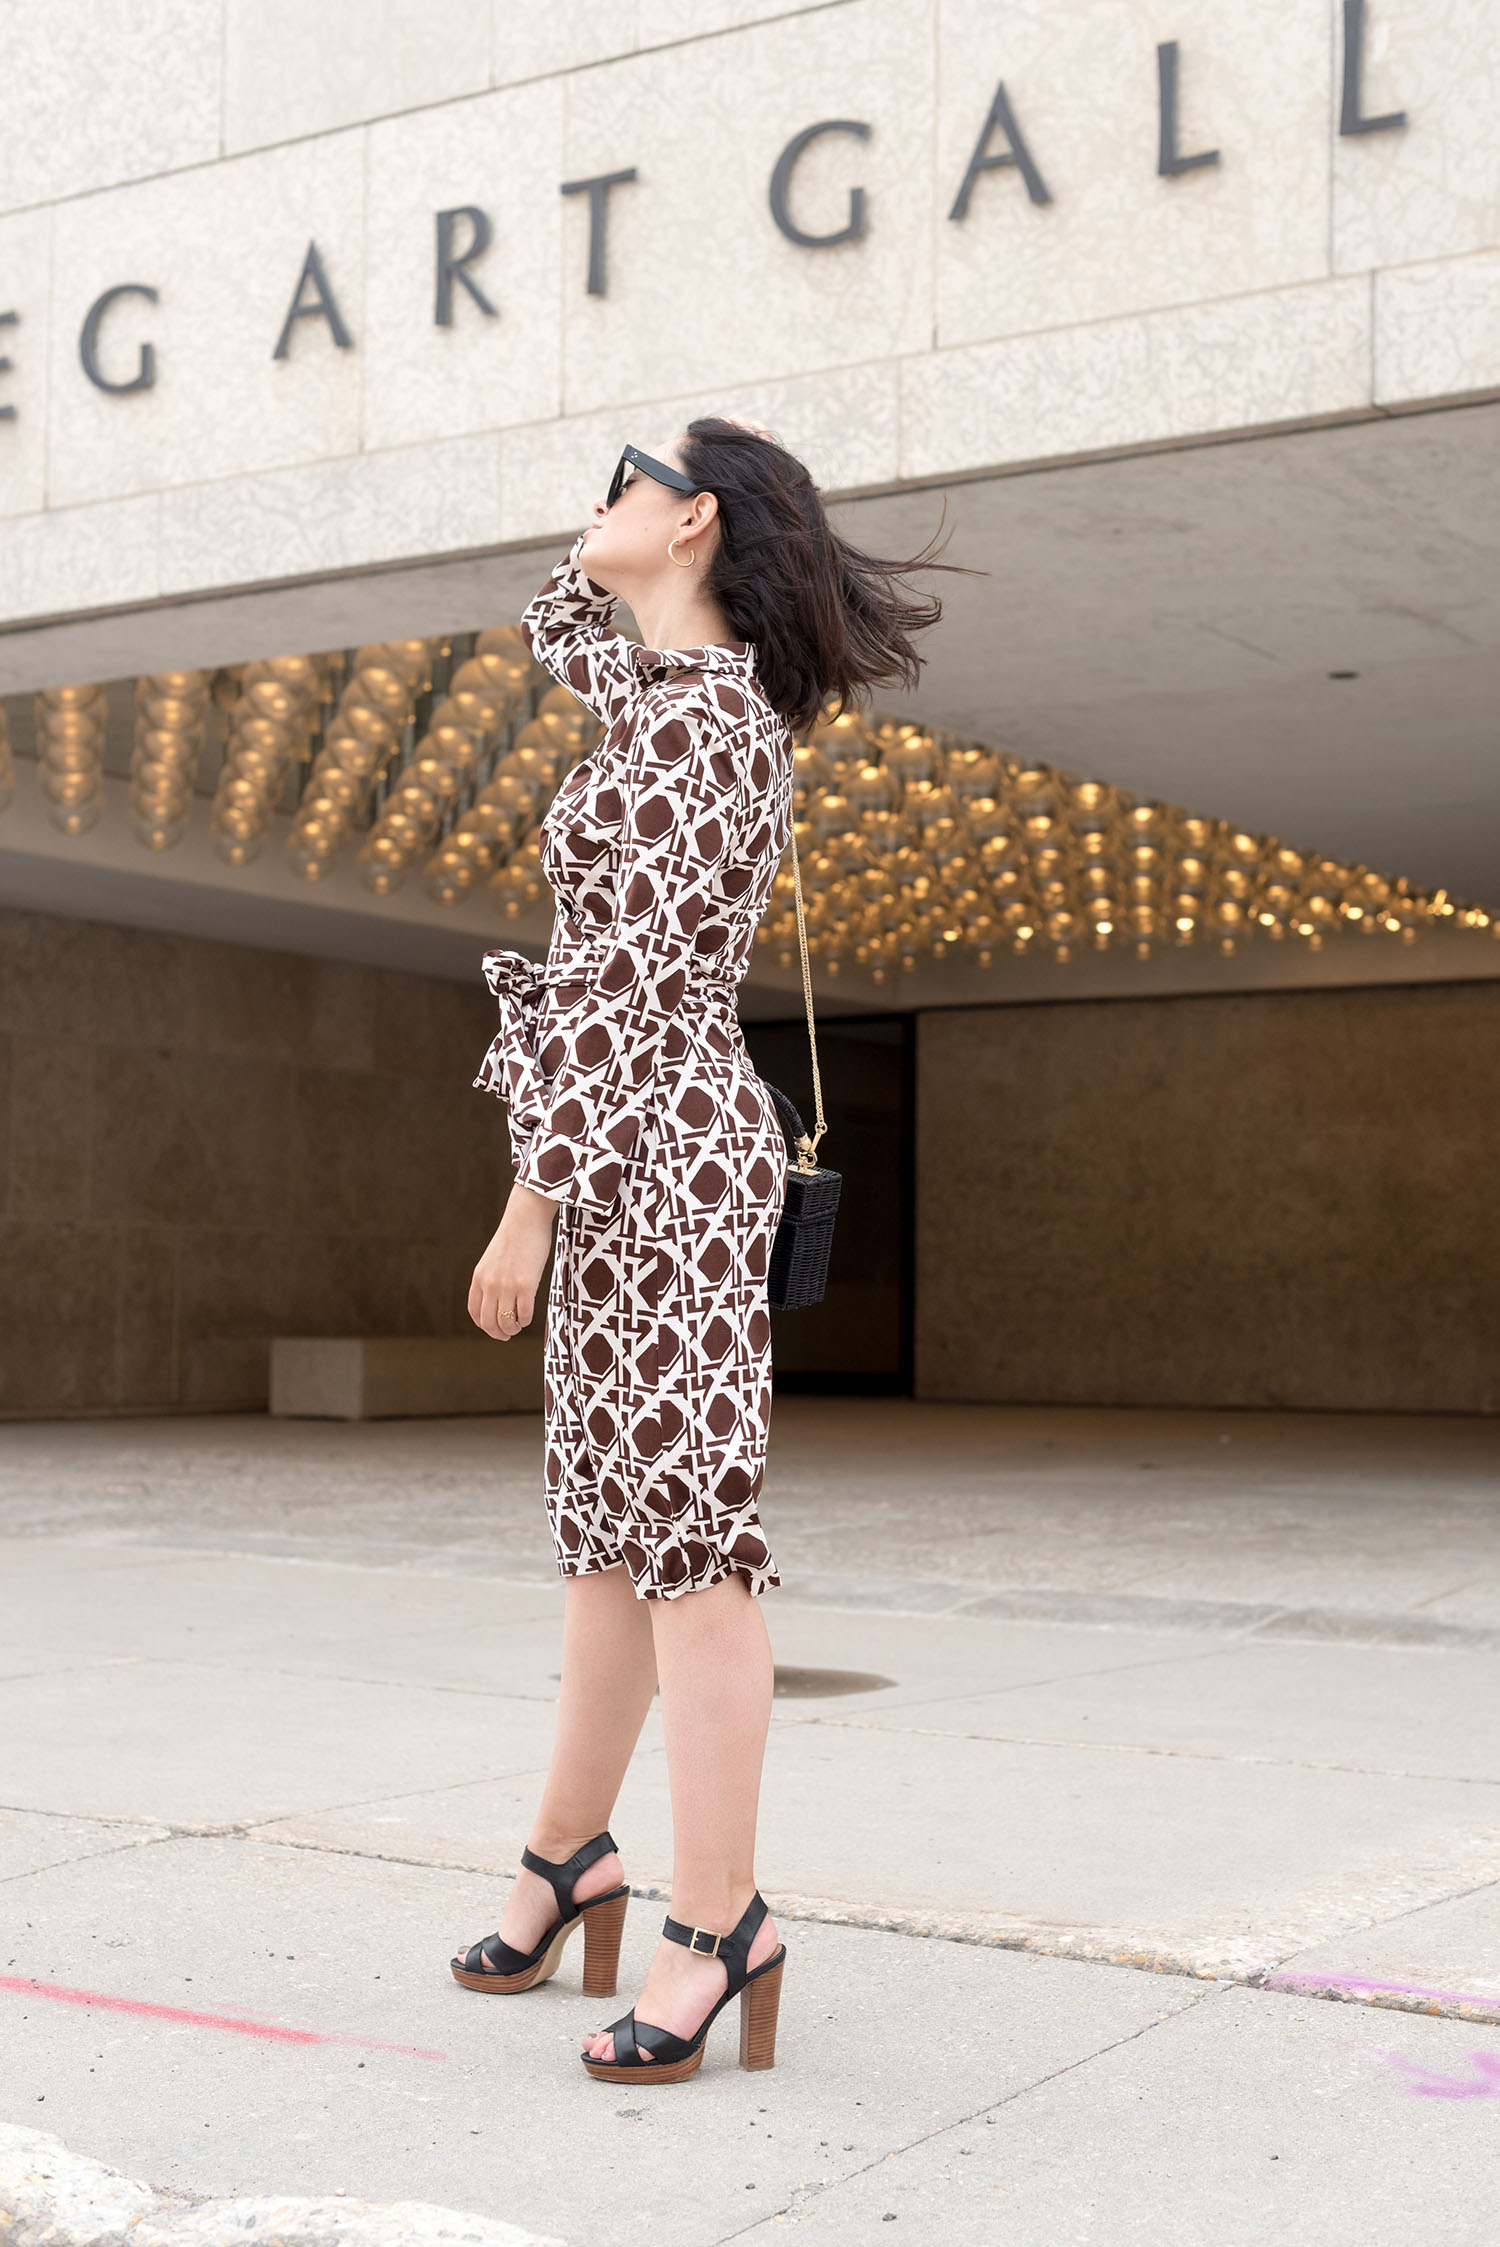 Top Canadian fashion blogger Cee Fardoe of Coco & Vera at the Winnipeg Art Gallery, wearing a vintage DVF dress and Le Chateau sandals